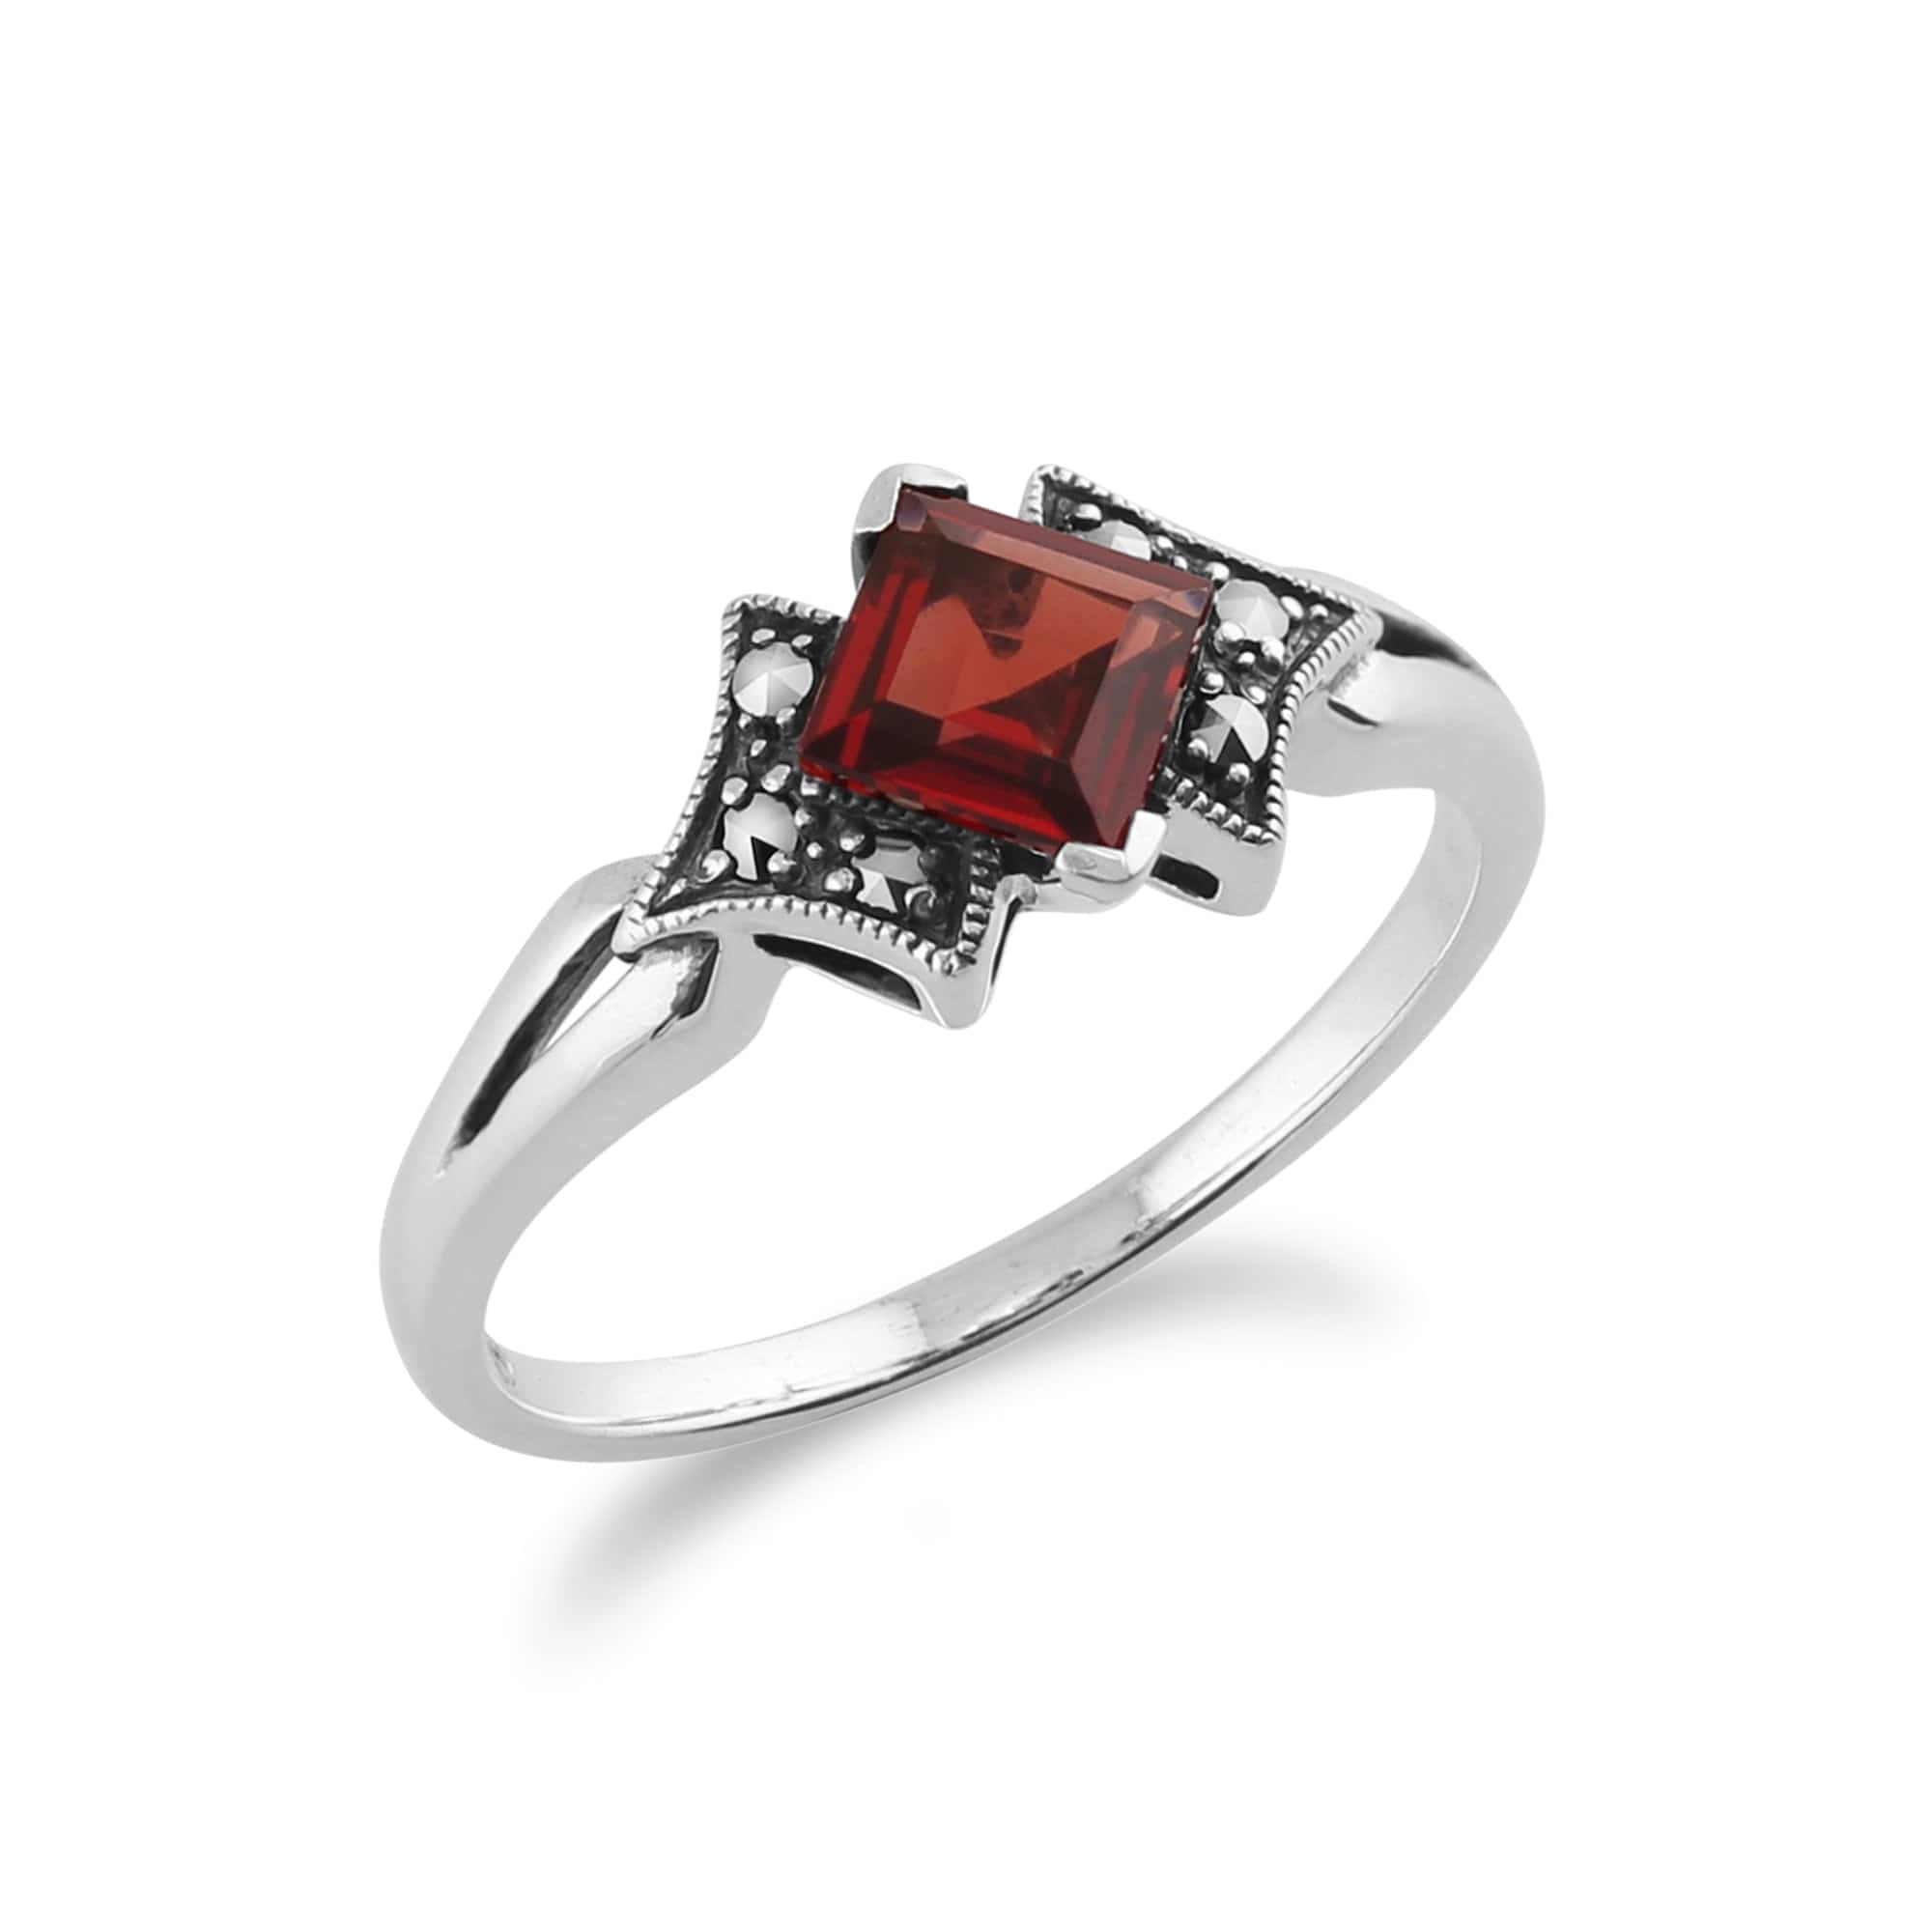 214R393302925 Art Deco Style Square Garnet & Marcasite Ring in 925 Sterling Silver 2